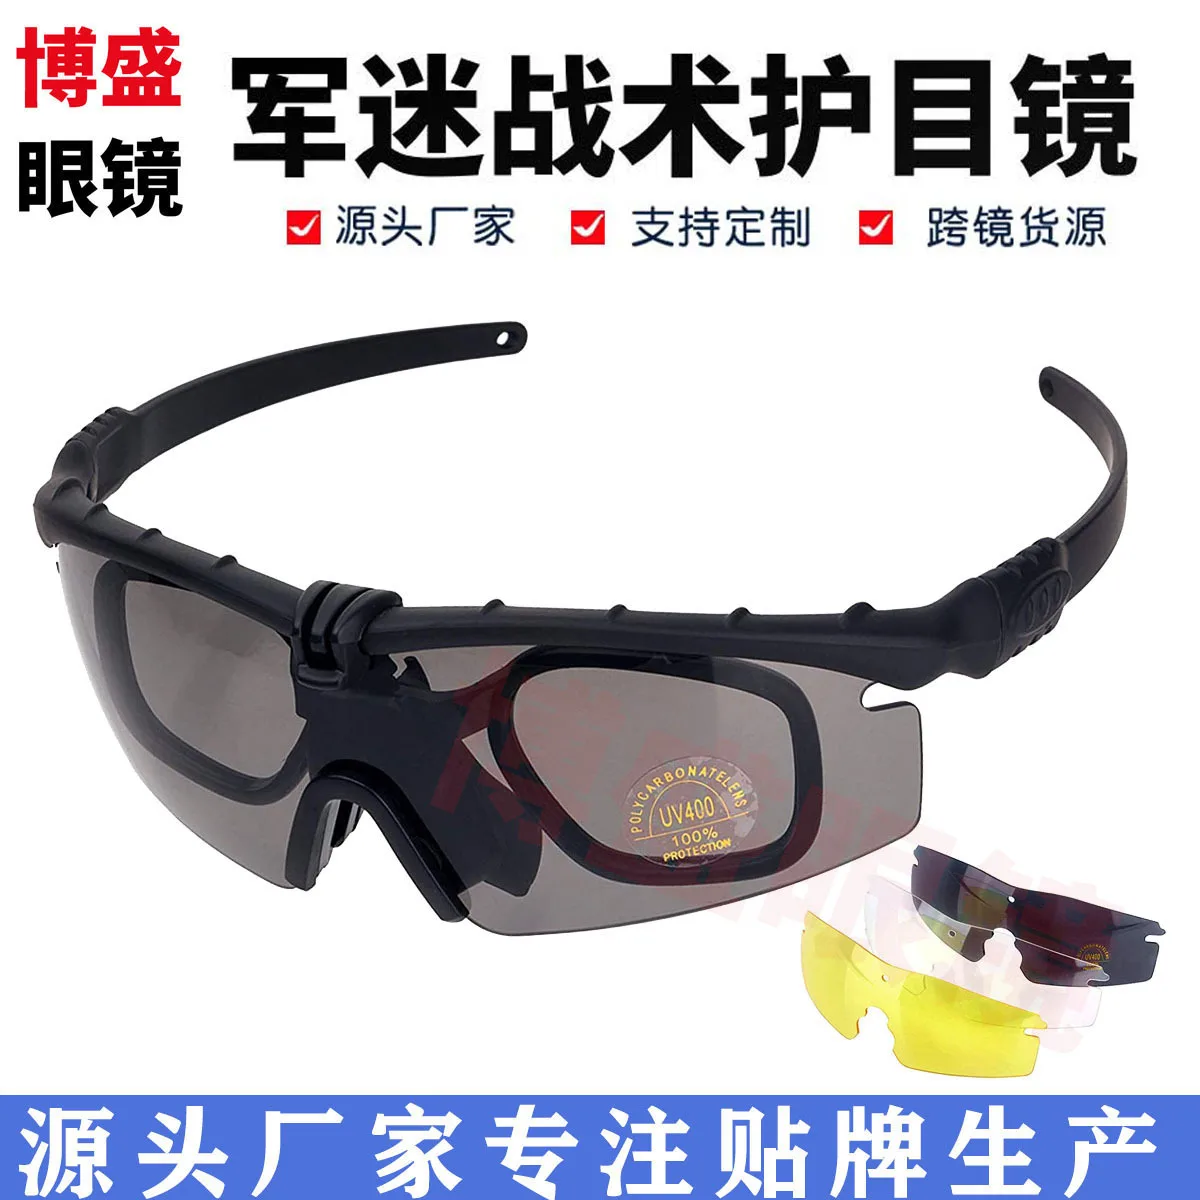 

Military fan tactical glasses CS helmet bulletproof windproof goggles special forces anti-impact night vision shooting goggles